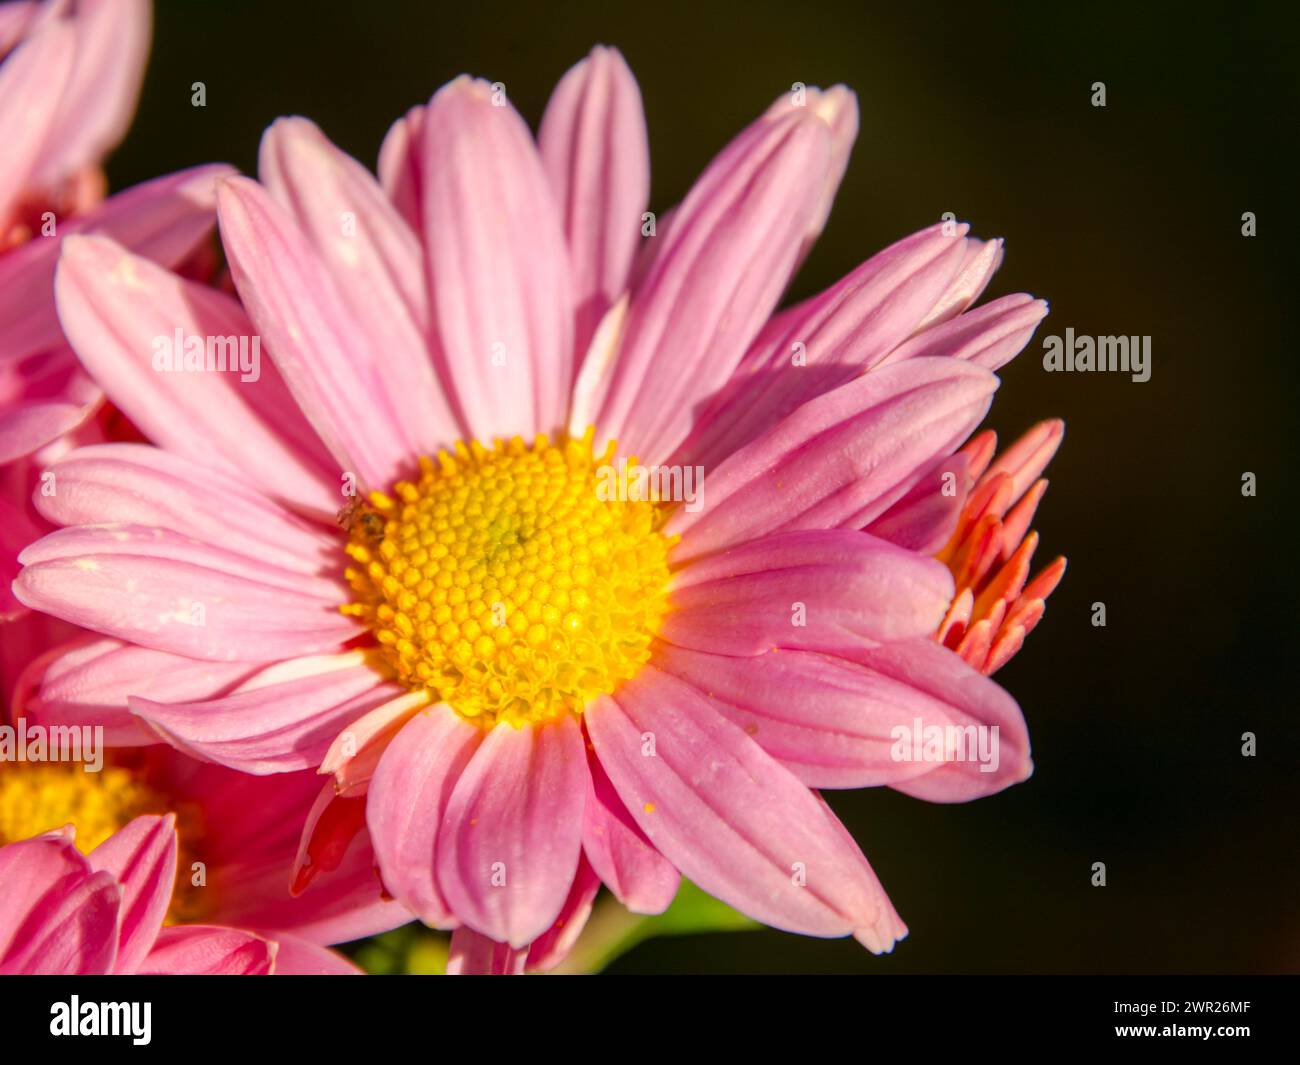 Painted daisy or pyrethrum, its scientific name is Tanacetum coccineum Stock Photo